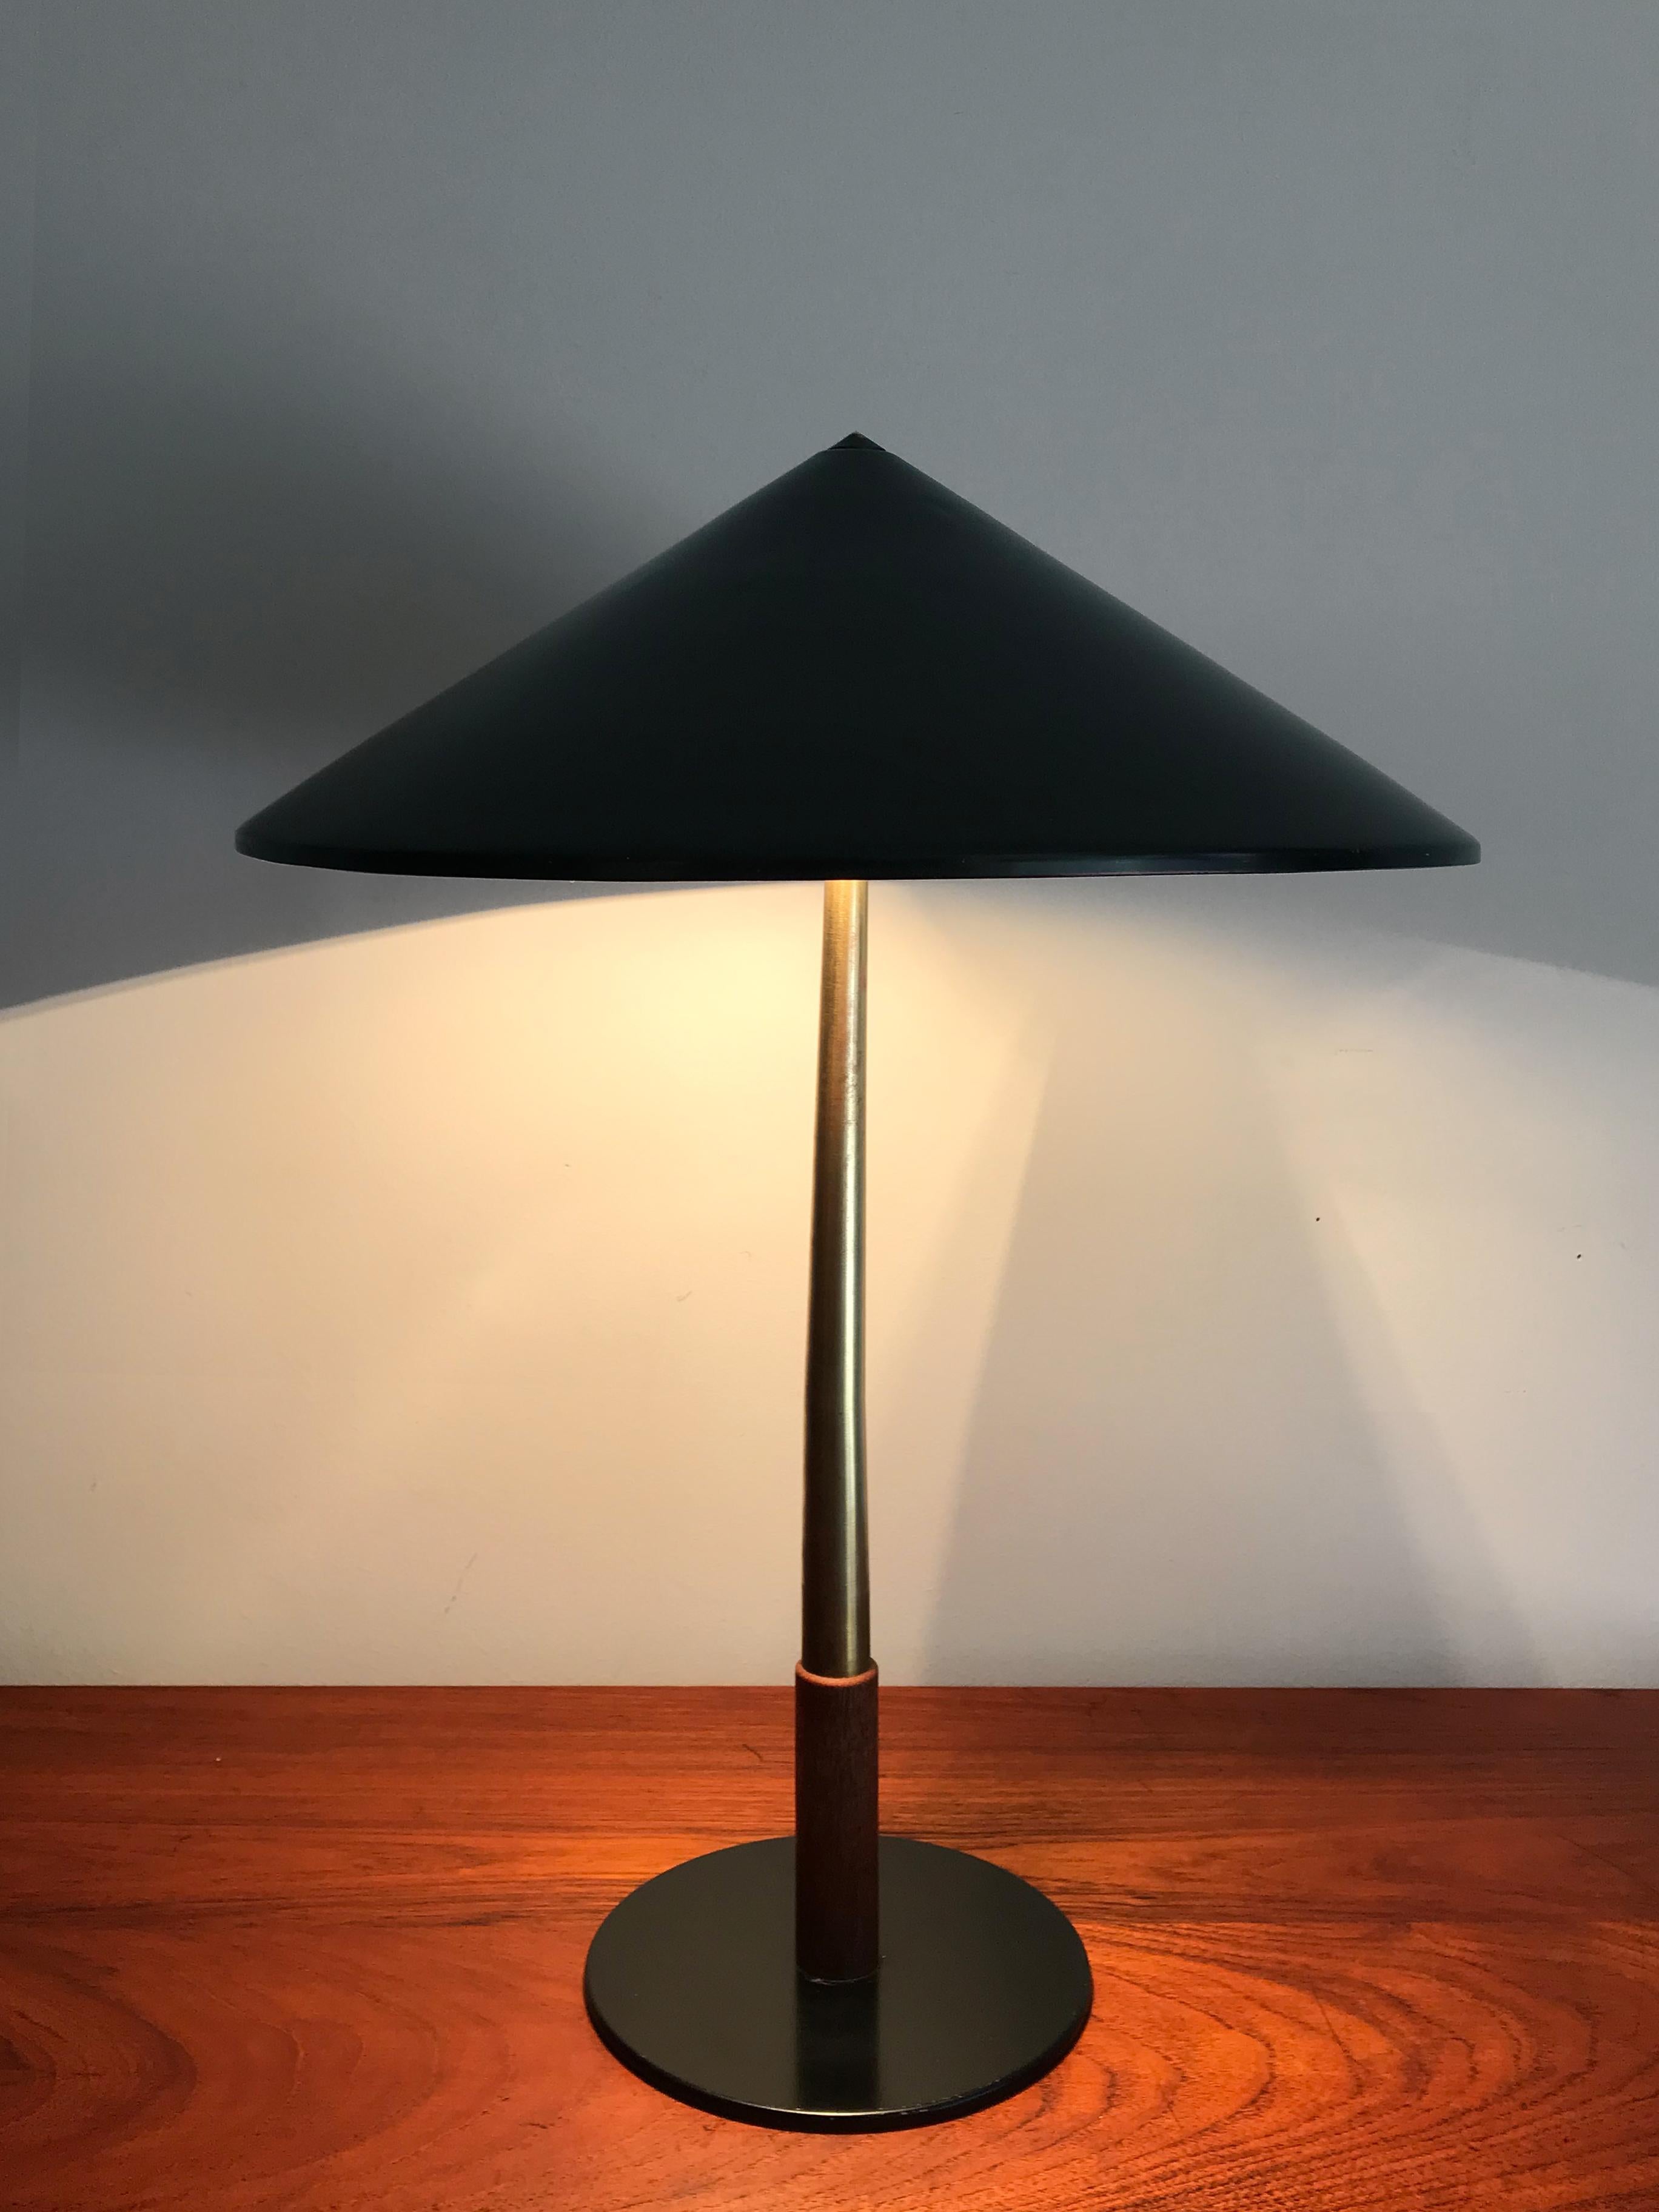 Very rare Danish desk or table lamp designed by Jo Hammerborg for Fog & Morup, brass stem and teak detail, painted metal hat, original manufacturing label, early 1950s.

Please note that the lamp is original of the period and this shows normal